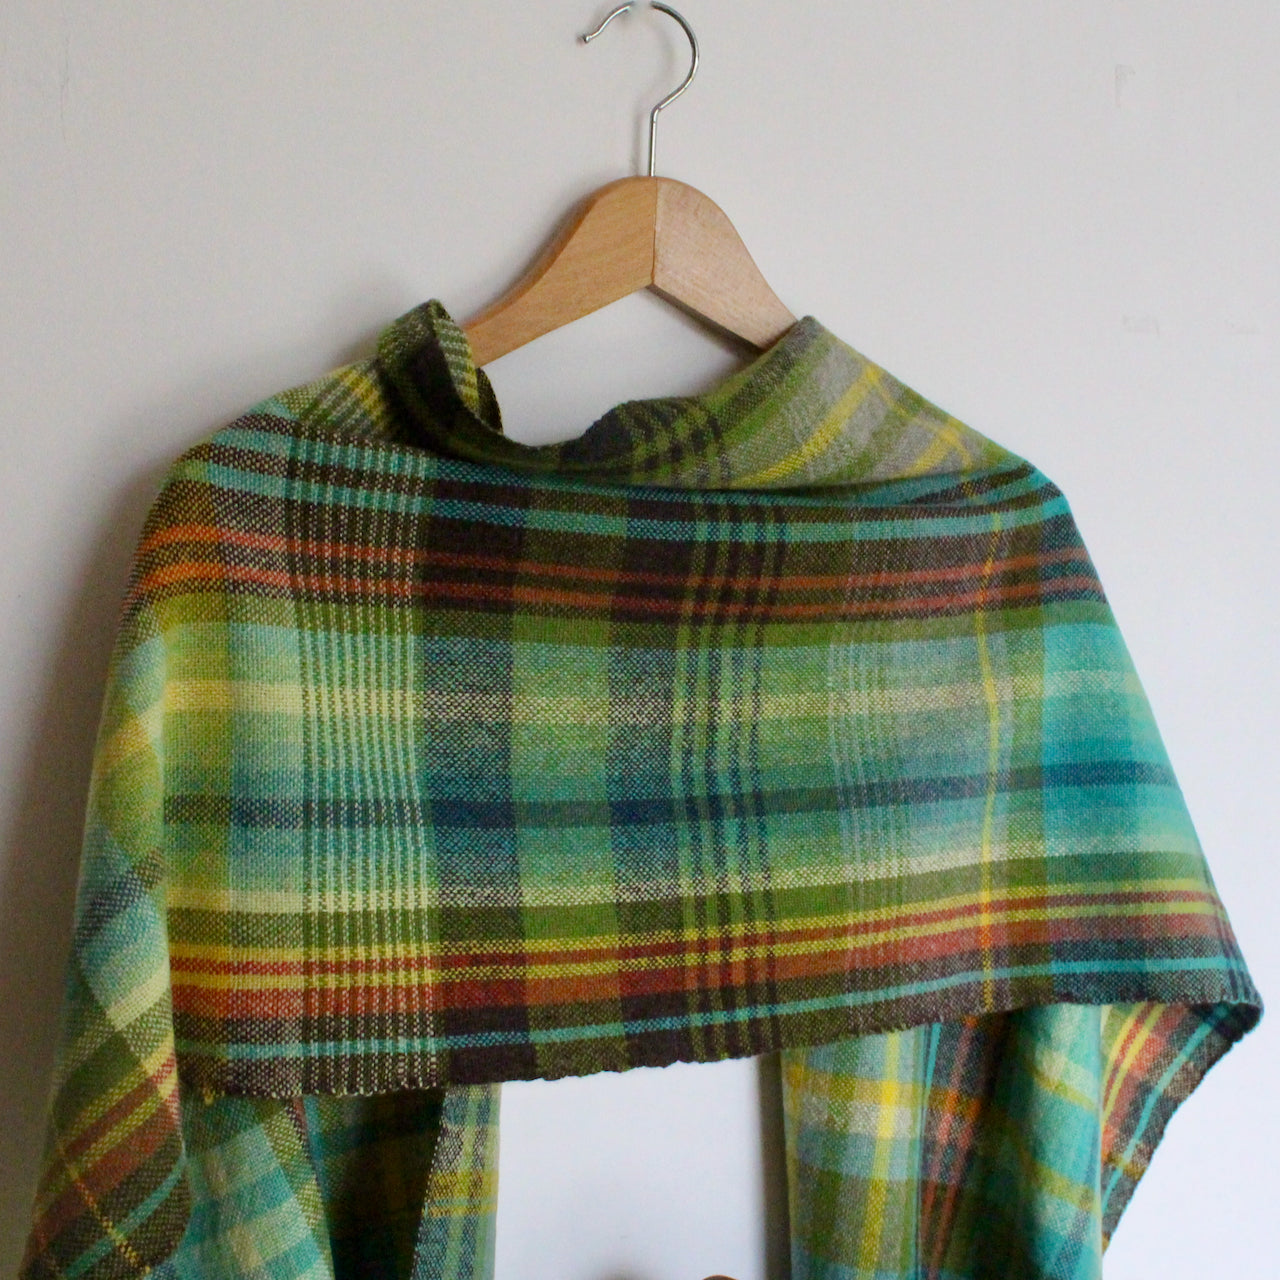 handwoven woollen scarf by Teresa Dunne Cornish weaver in turquoise, green and yellow.